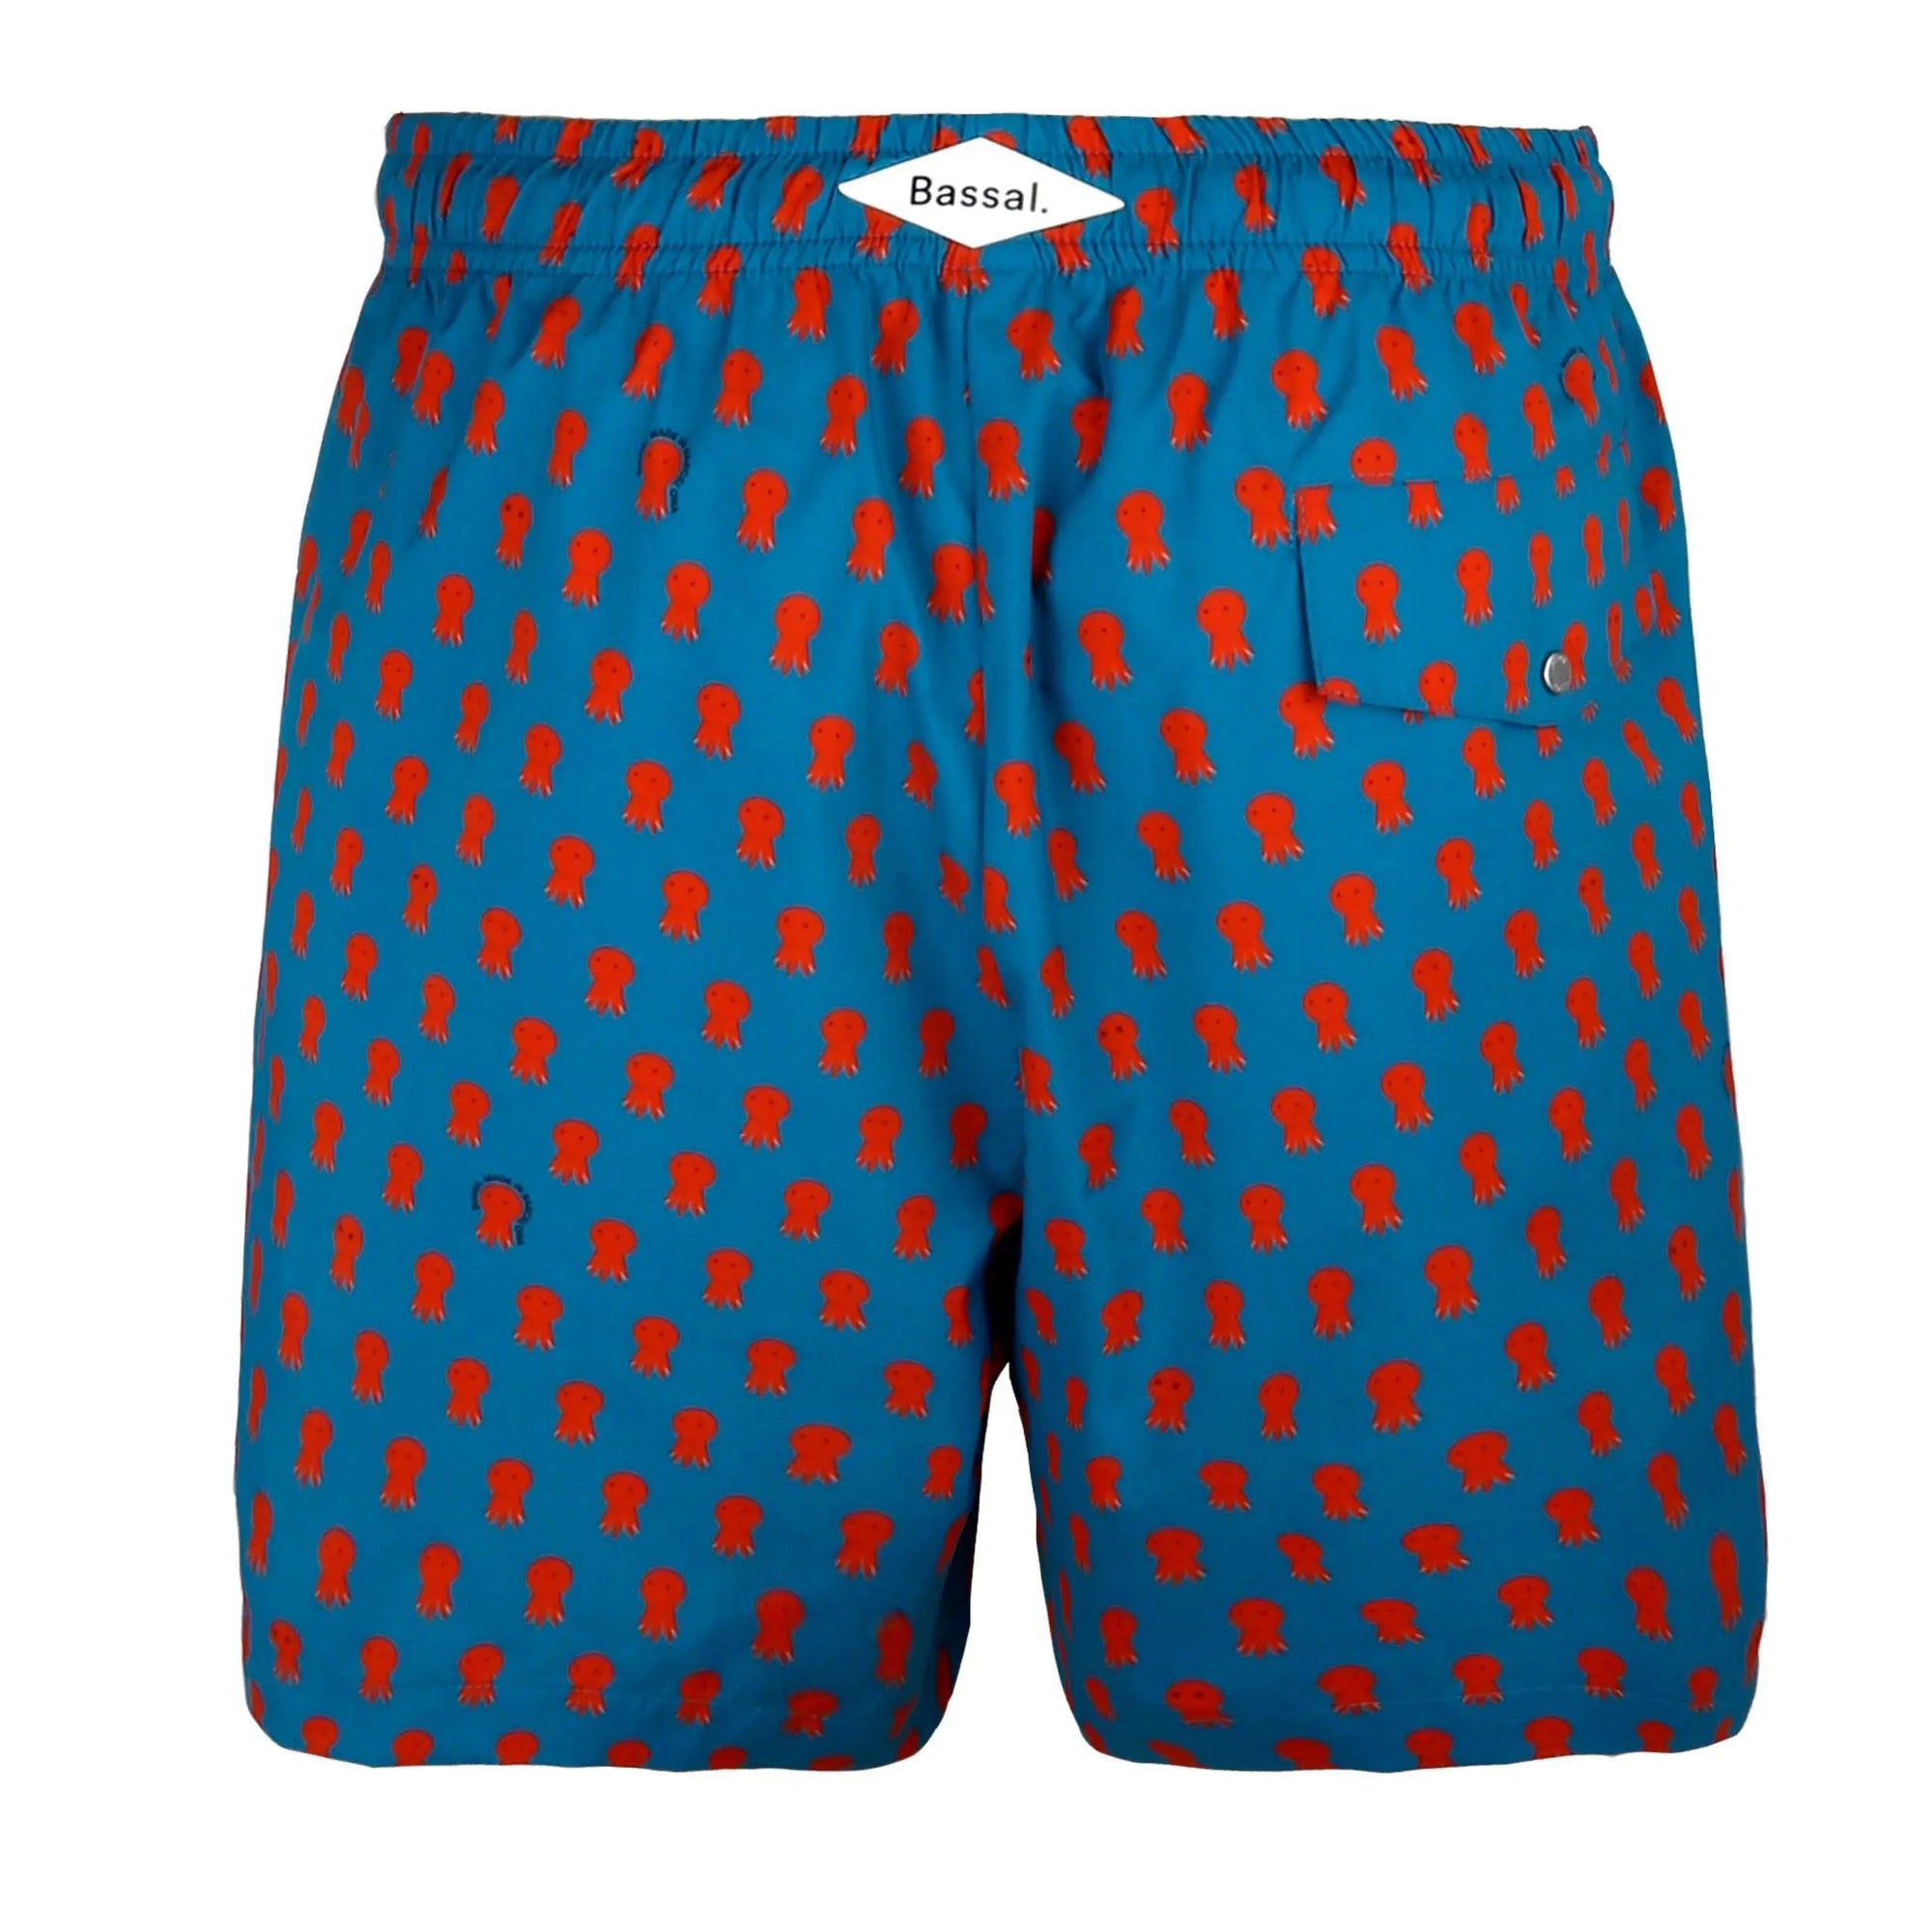 A neatly packed pair of Octo Swimwear with an orange octopus pattern is displayed in an open white box. The waistband is elastic with a blue drawstring. A tag labeled "Bassal" is attached to the swimwear, which are folded and arranged tidily inside the box.
